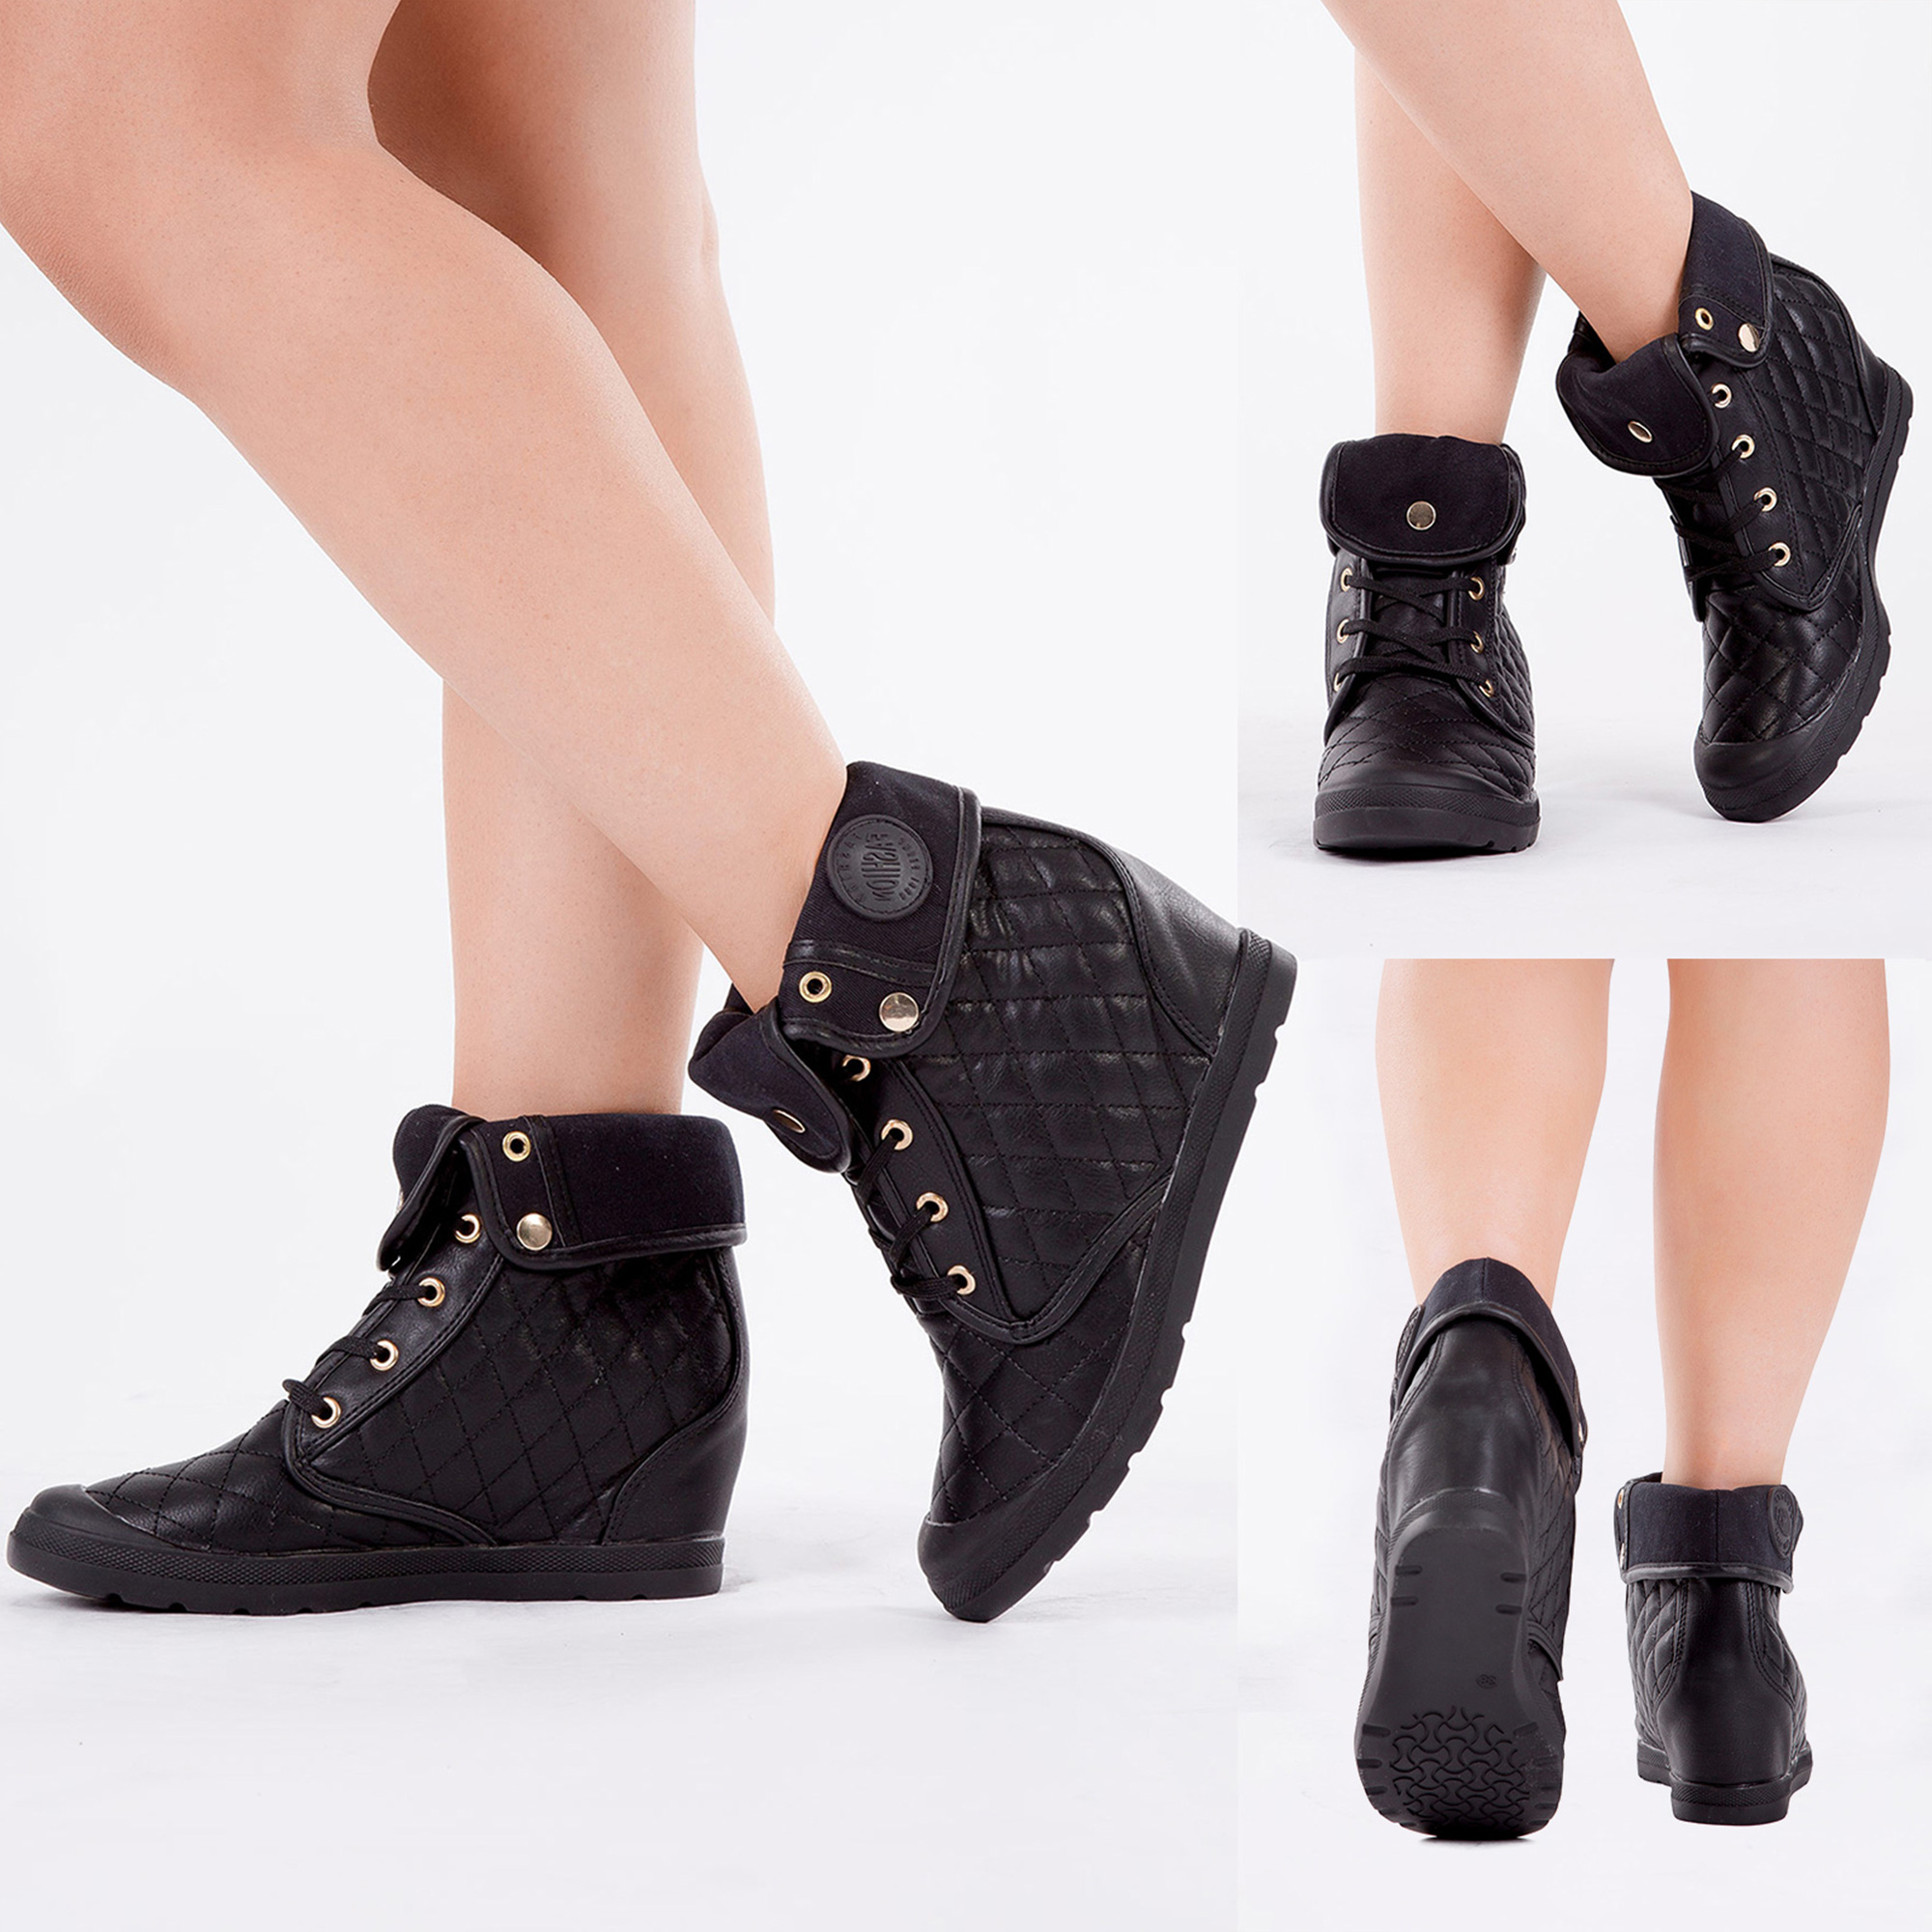 black trainer boots womens